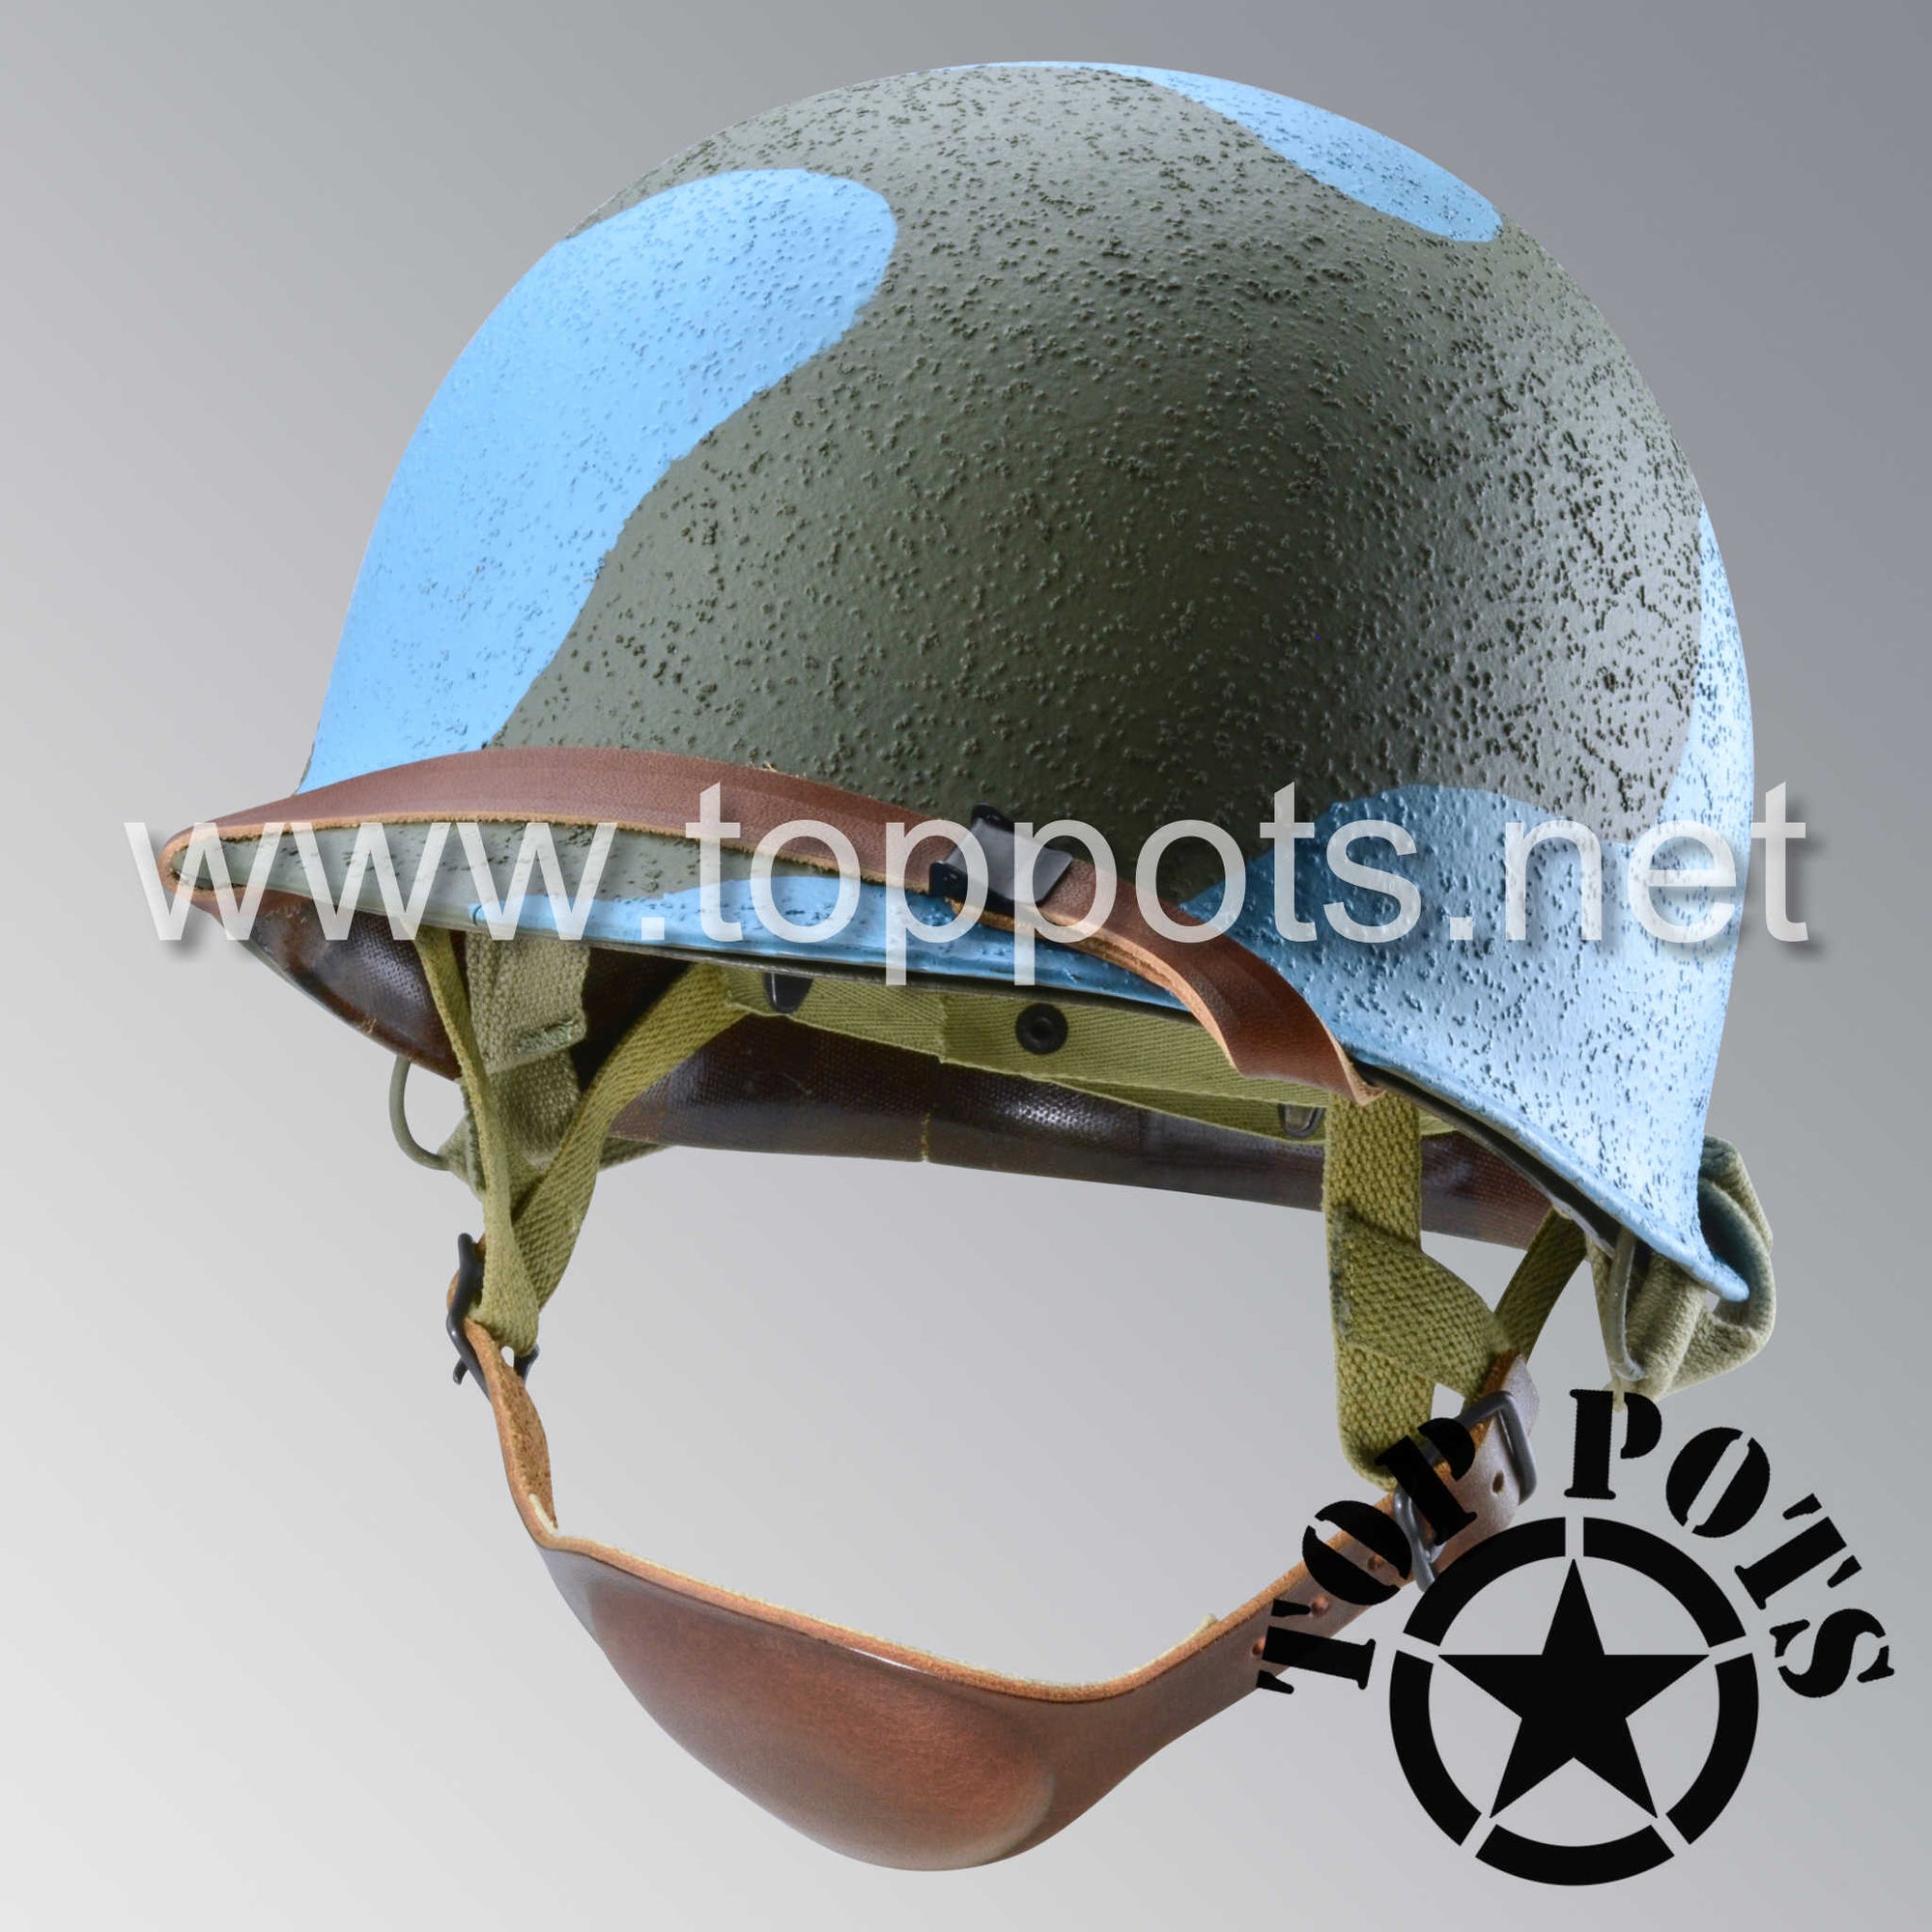 WWII USMC Marine Corps M2 Para Marine Paratrooper Airborne Helmet D Bale Shell and Liner with Pacific Water Camouflage Emblem - Deep Ocean Blue